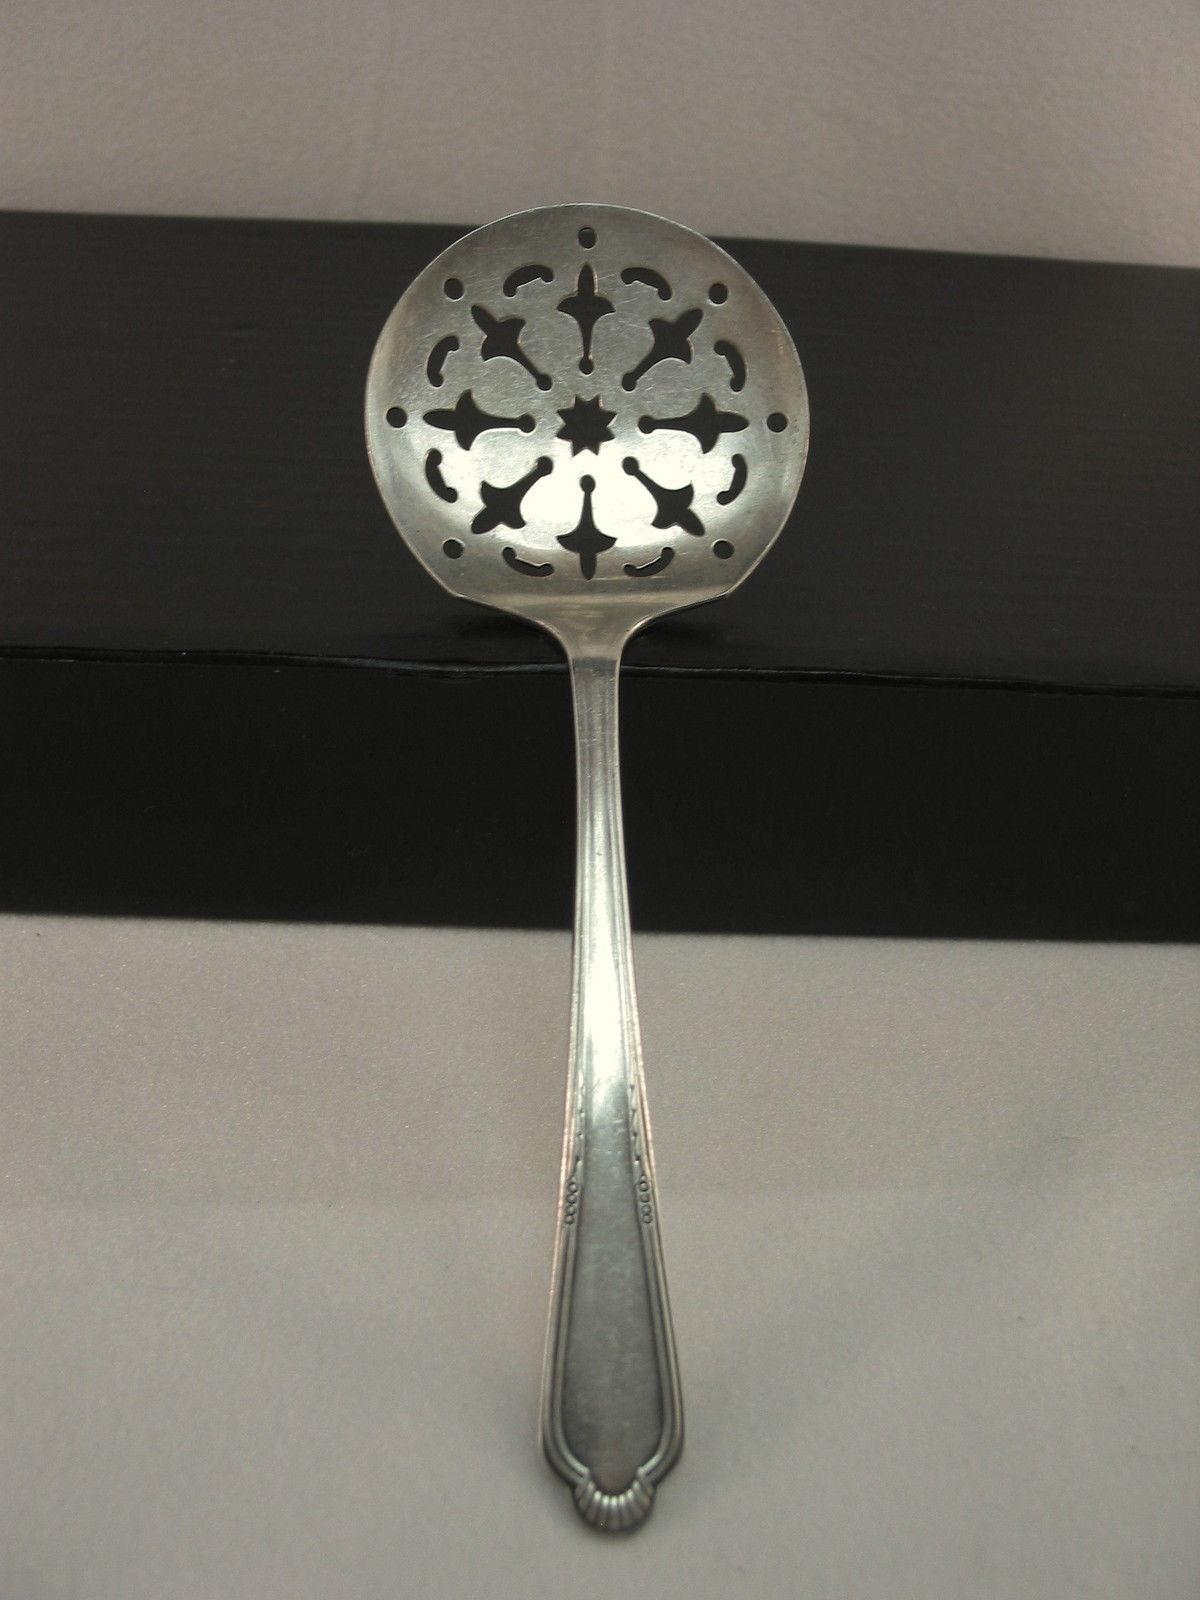 Primary image for Wm Rogers Tomato Server Spoon Laurel or Helena c1954 Silver Plate Pierced